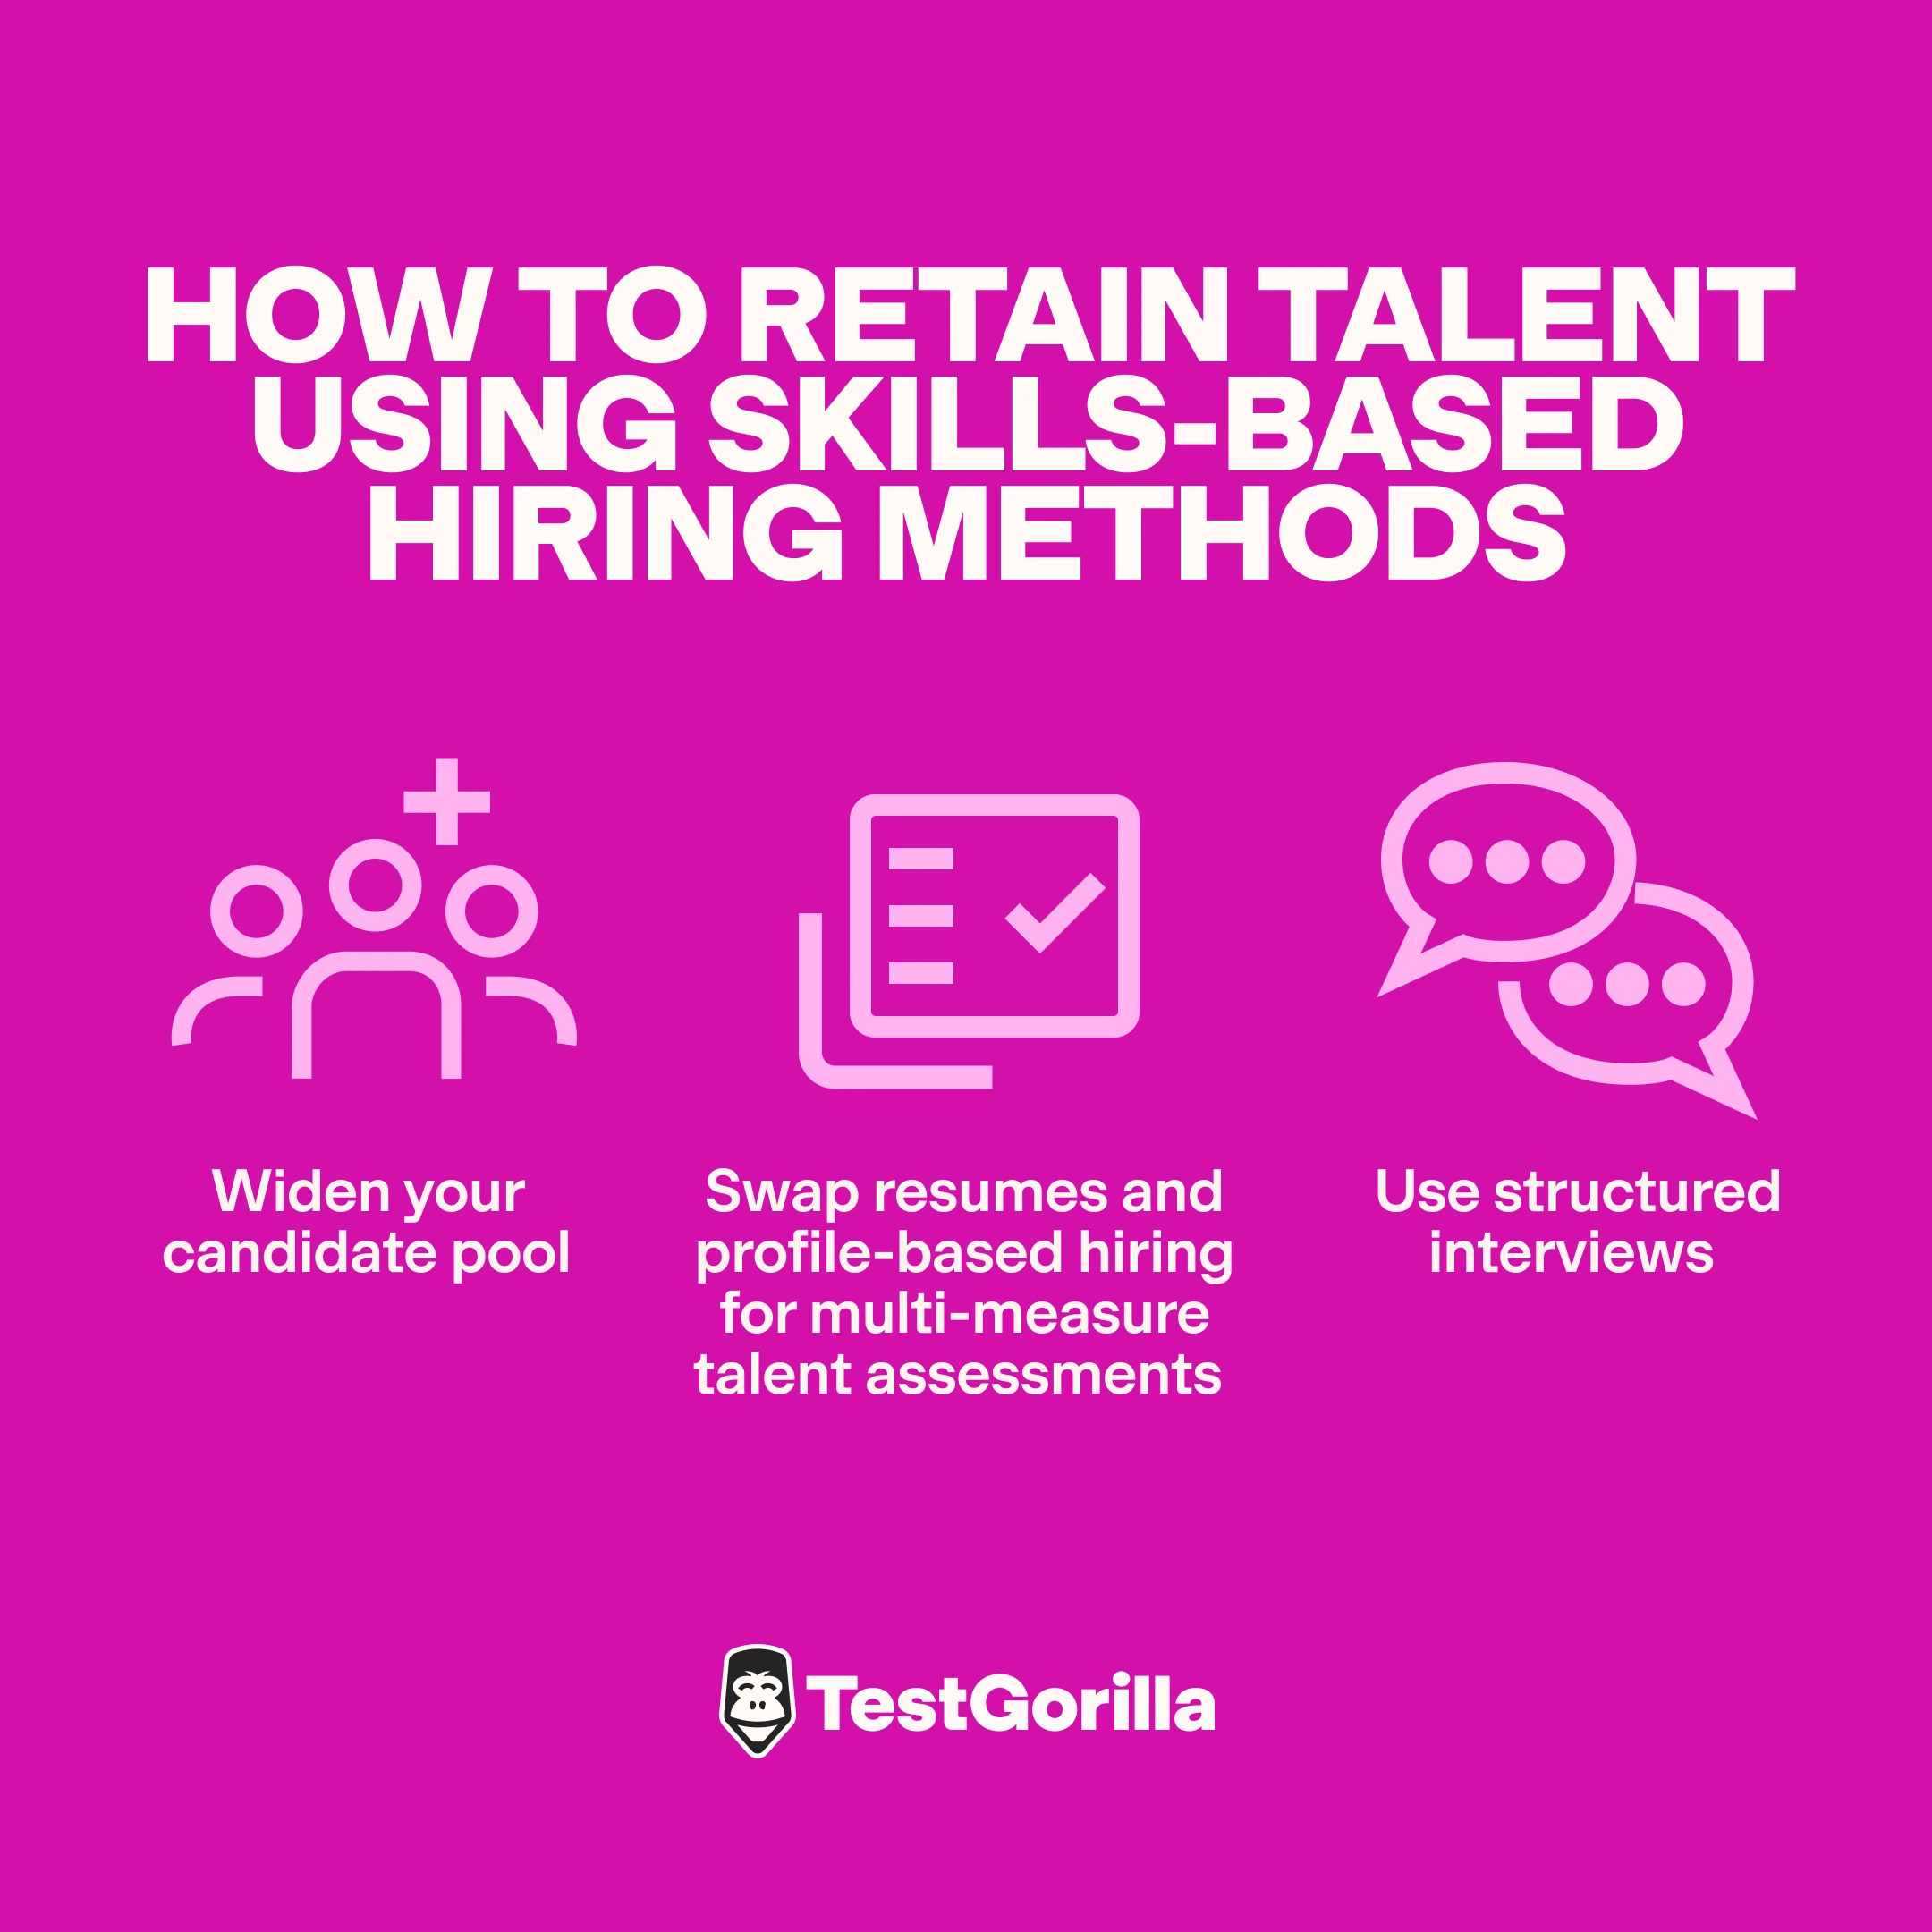 How to retain talent using skills based hiring methods graphic